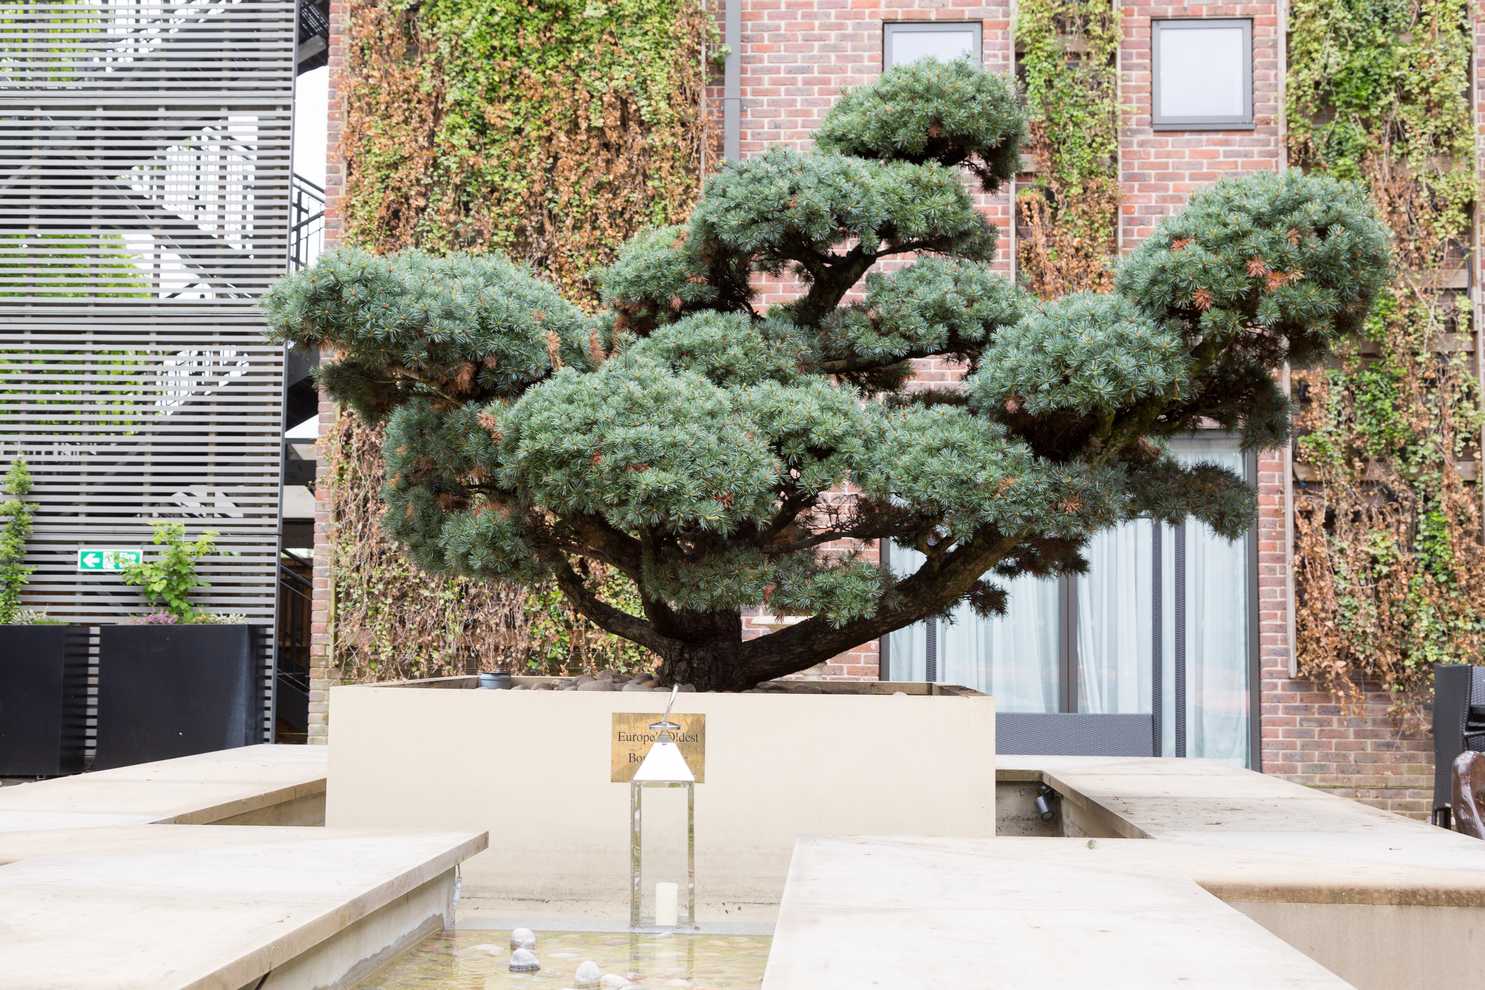 Hilton Syon Park On Twitter Did You Know We Have At Our Terrace The Oldest Bonsai Tree In Europe Bonsai Tree Oldest Europe Hilton Great London Natural Https T Co Dmpz4olqto